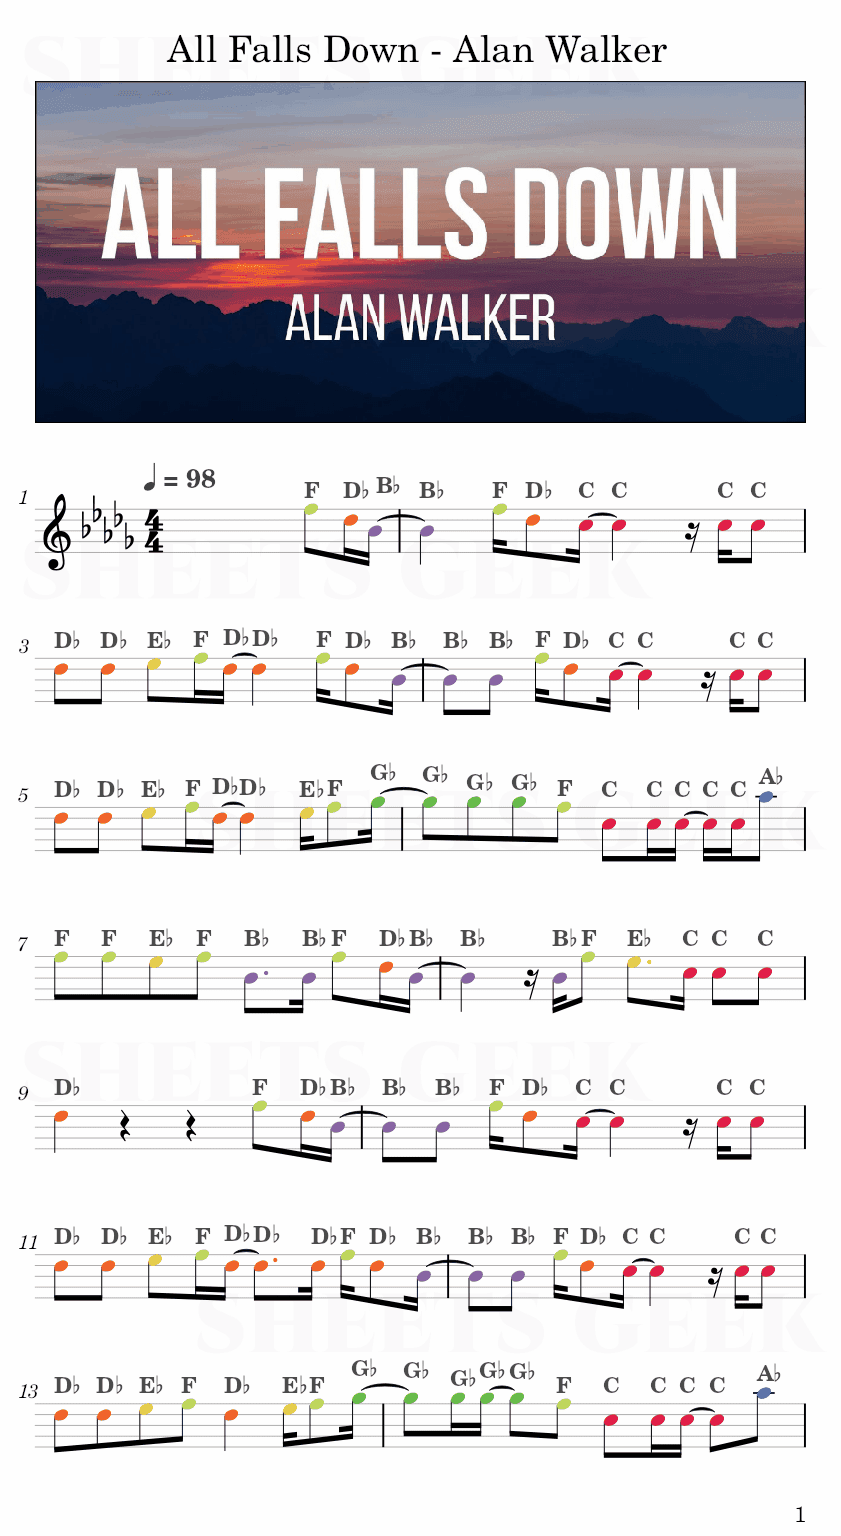 All Falls Down - Alan Walker Easy Sheet Music Free for piano, keyboard, flute, violin, sax, cello page 1